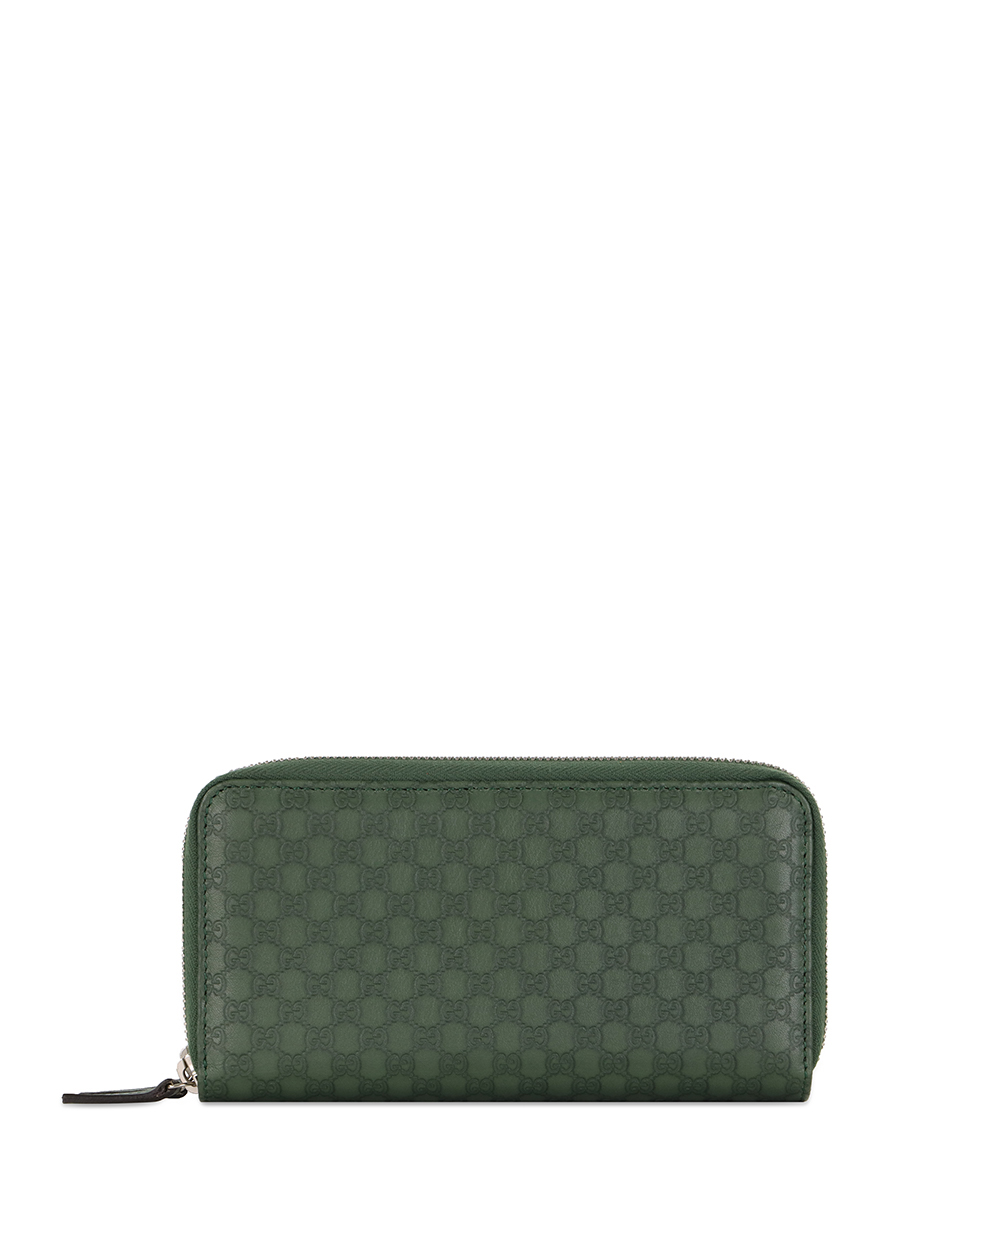 Image 1 of GUCCI WALLET ウォレット 295830 BMJ1N 3224